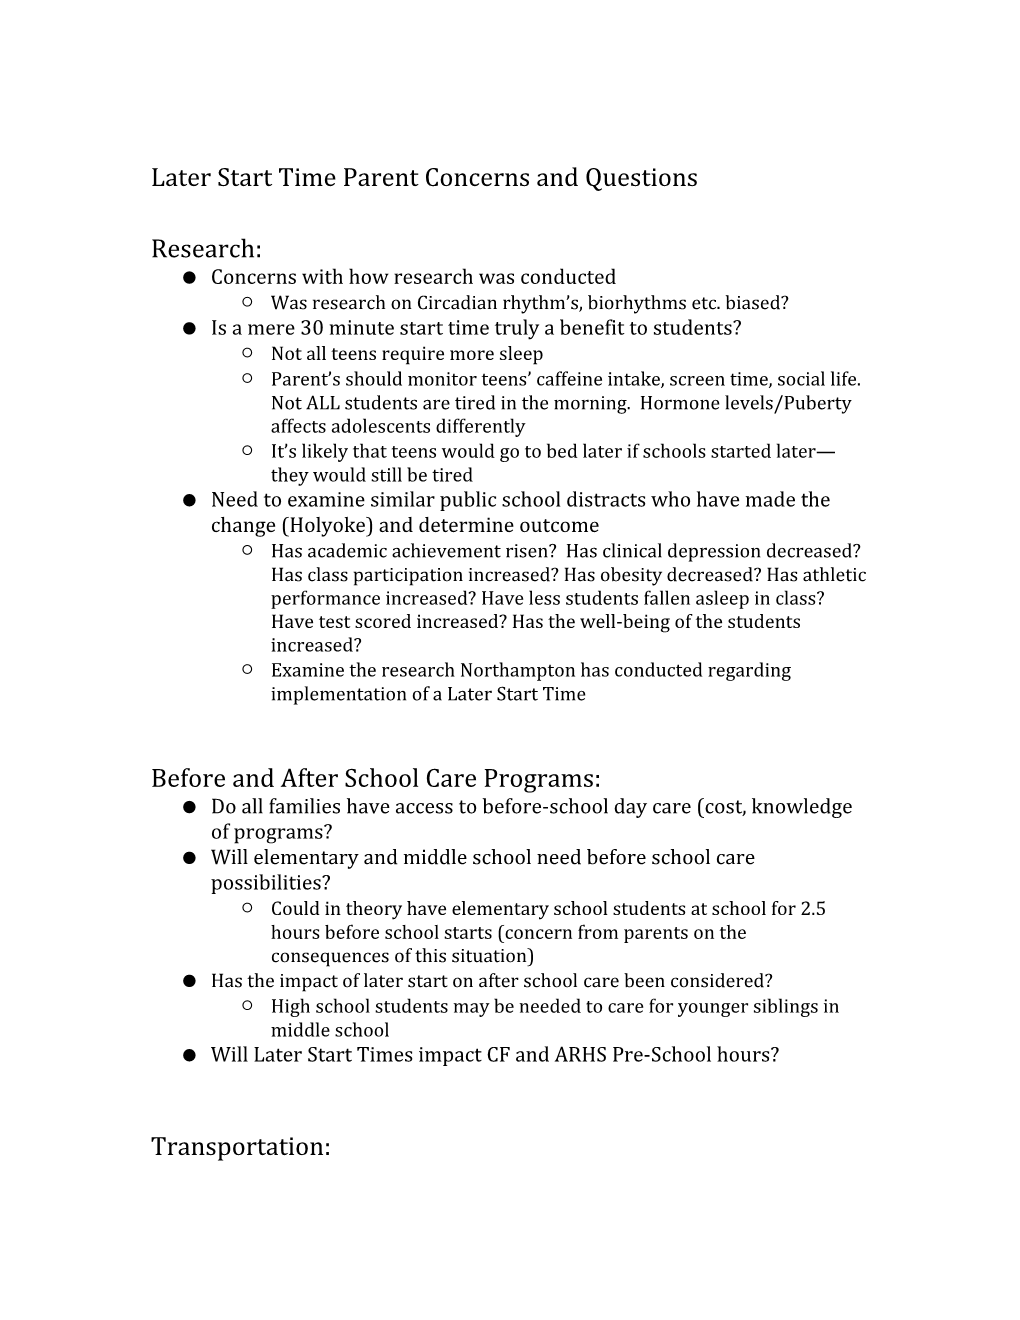 Later Start Time Parent Concerns and Questions